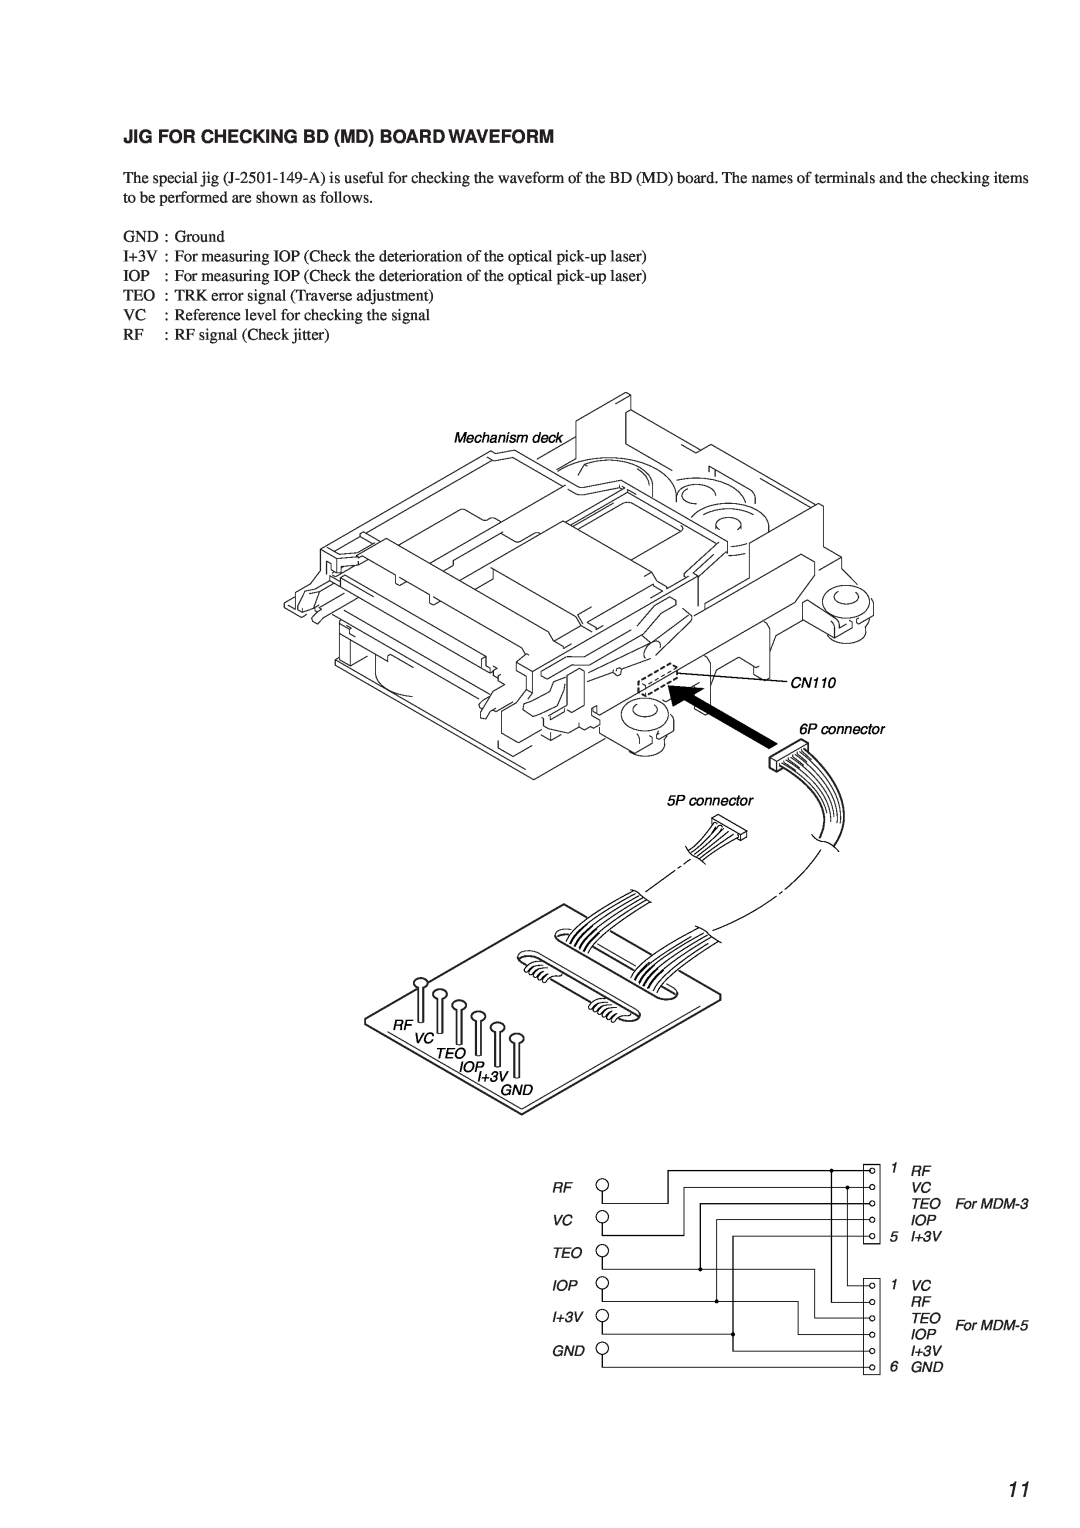 Sony HCD-MD373 service manual Jig For Checking Bd Md Board Waveform 